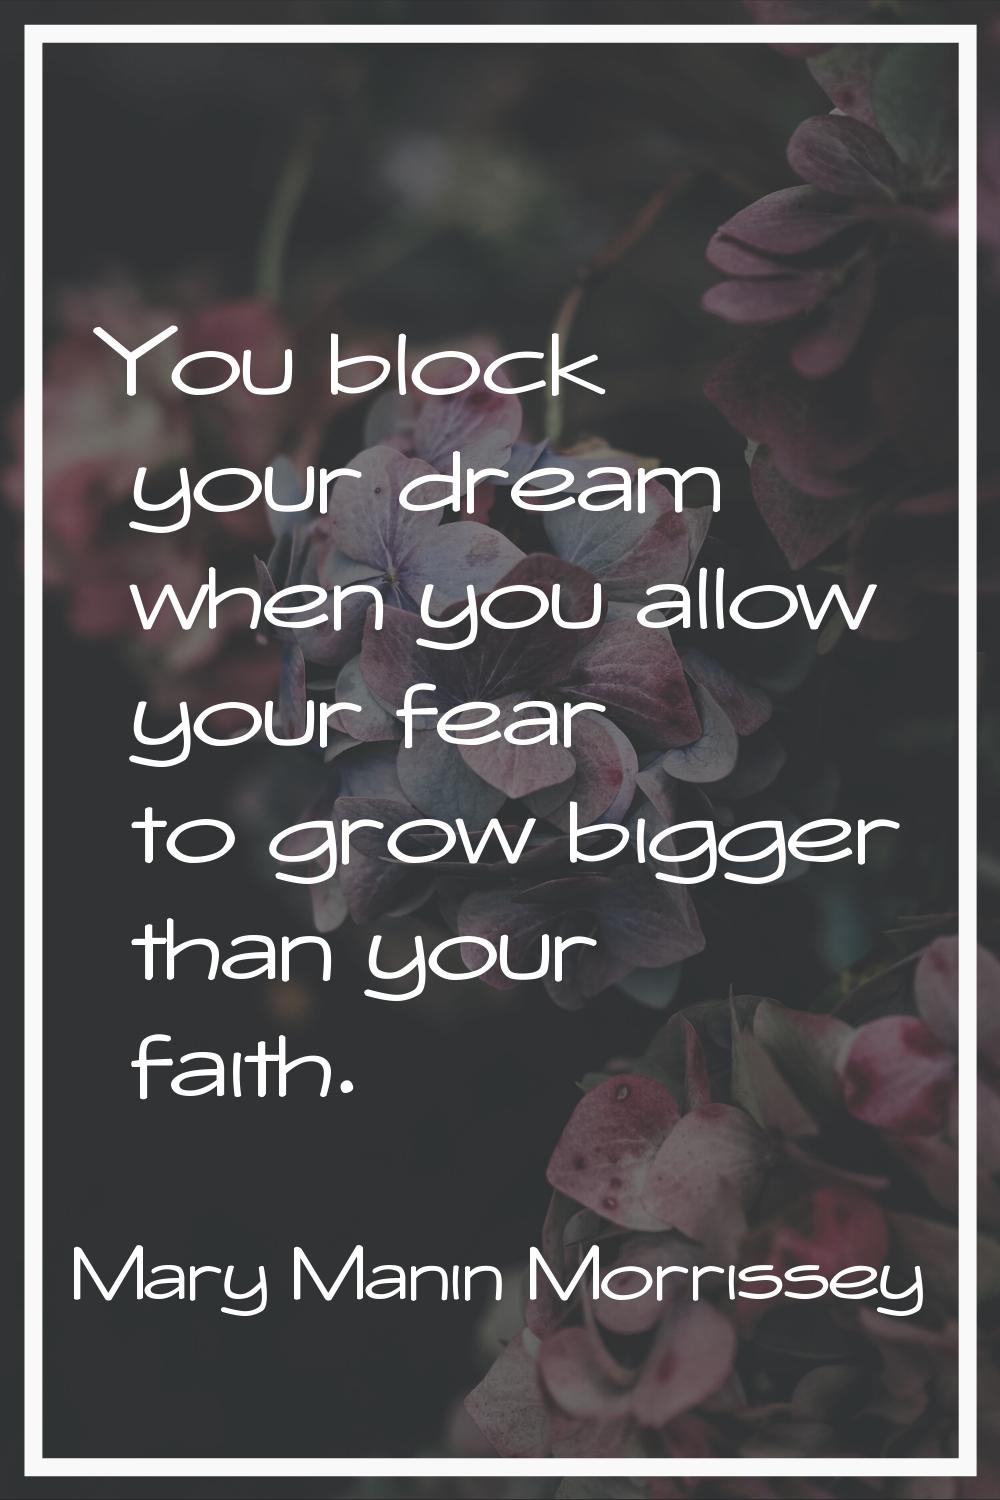 You block your dream when you allow your fear to grow bigger than your faith.